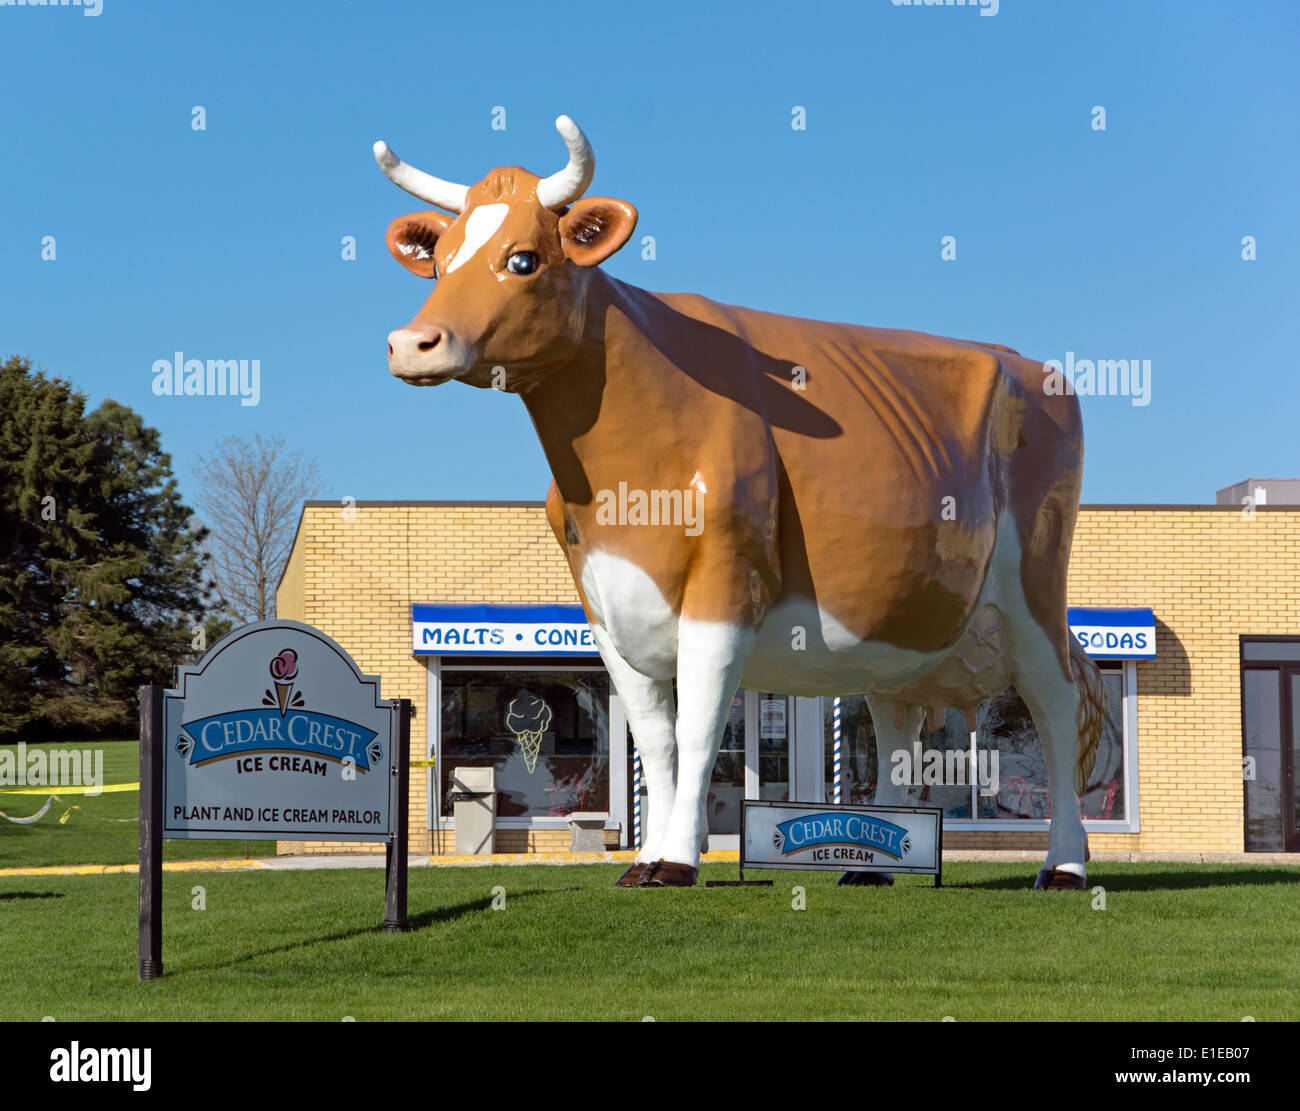 Giant cow statue advertising Cedar Crest Ice Cream Parlor in Manitowoc, Wisconsin. Stock Photo